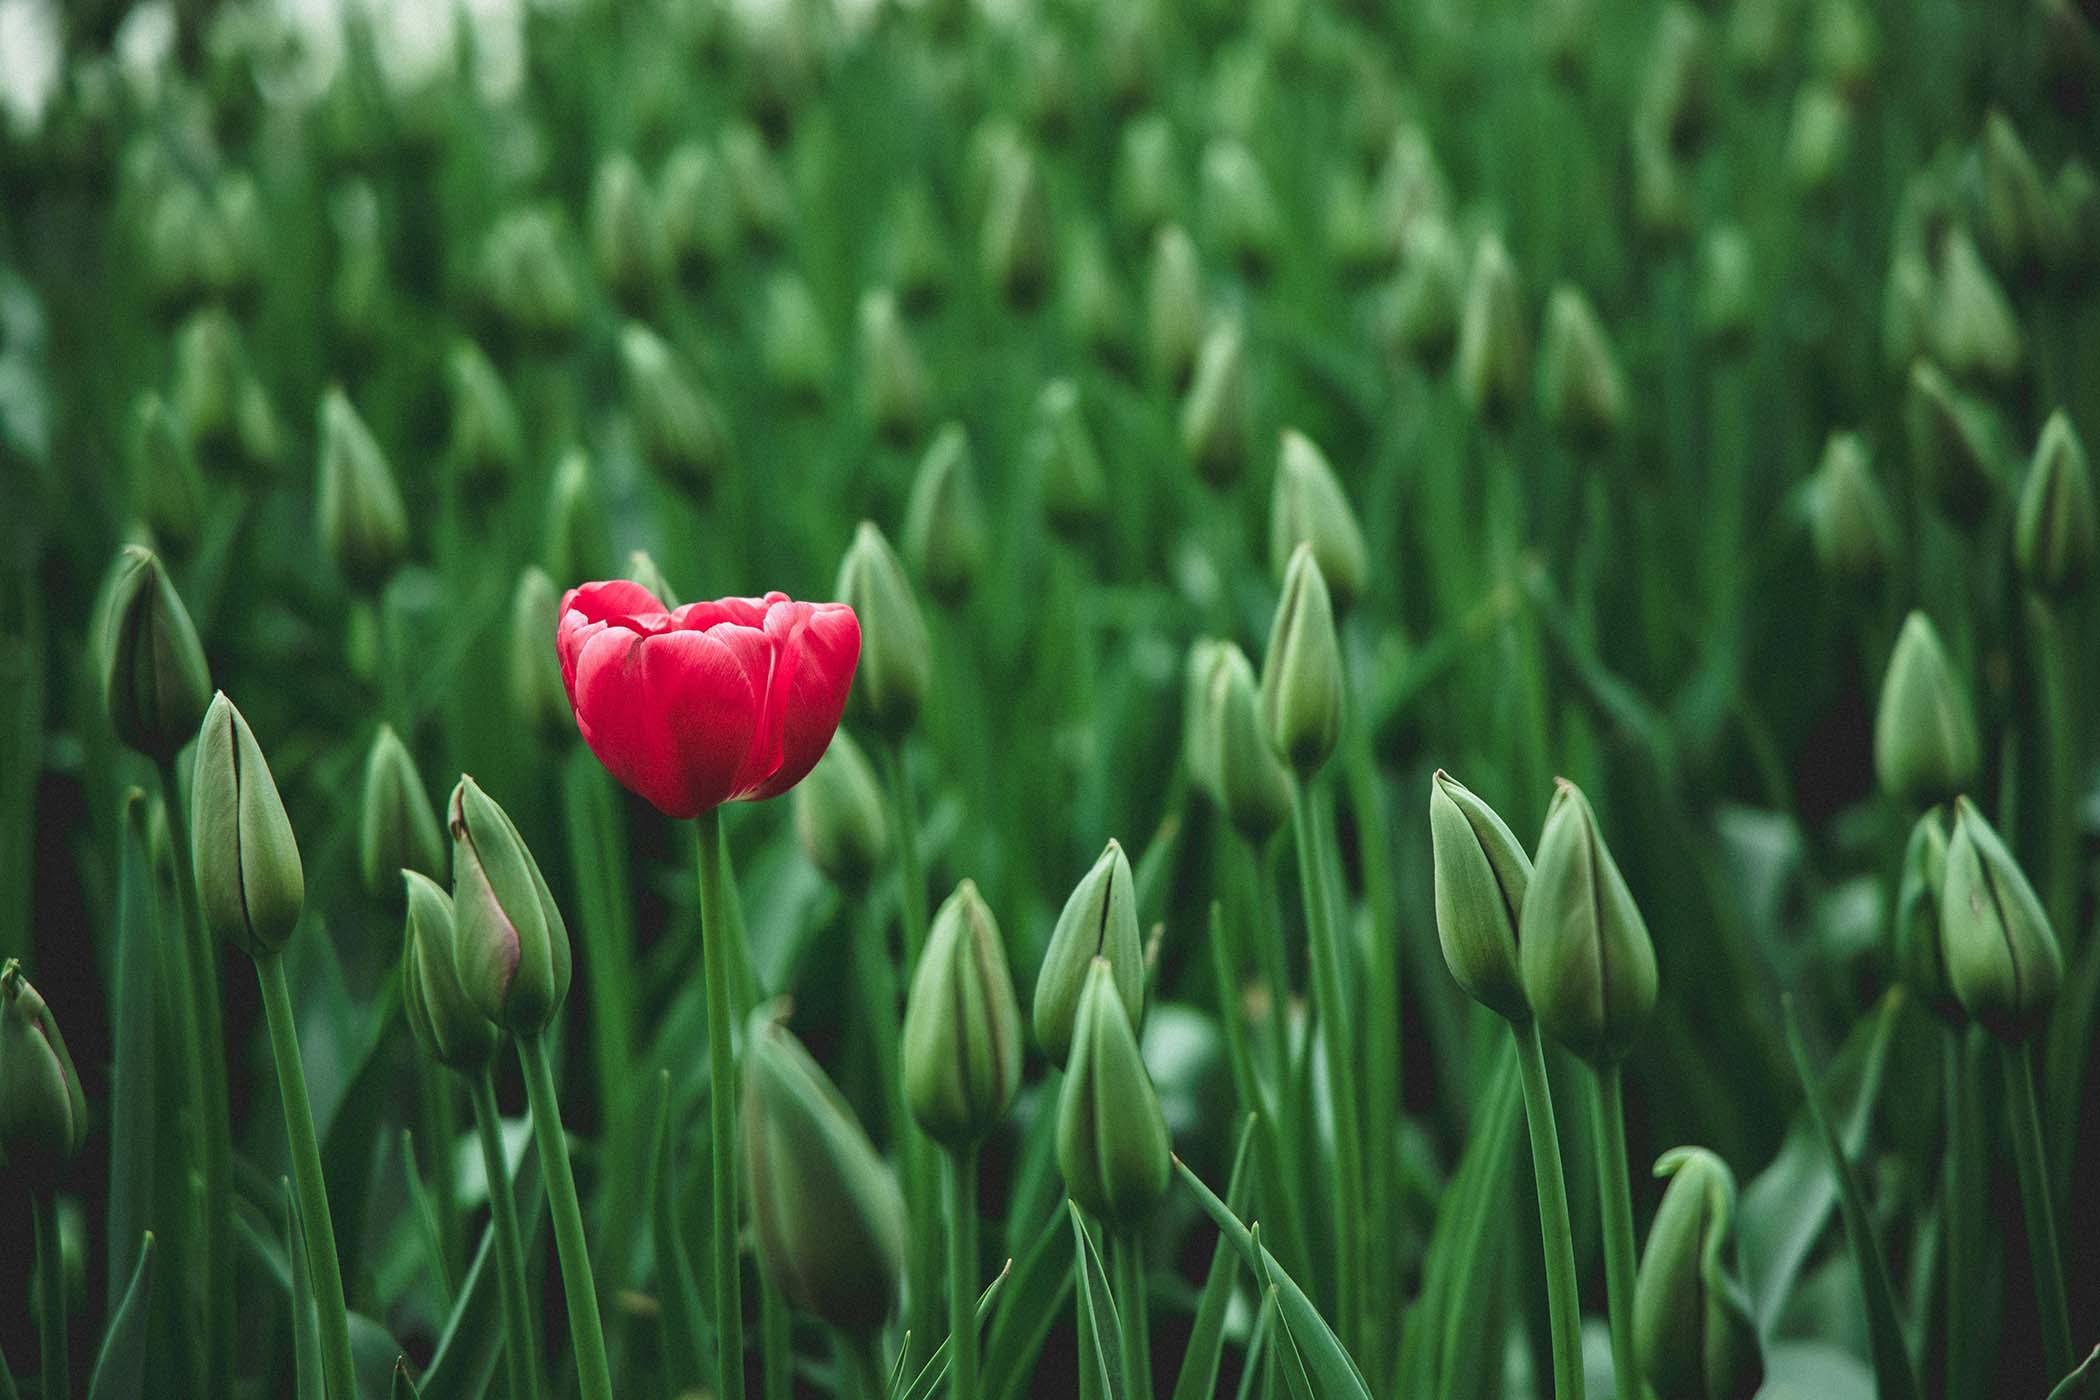 red tulip amidst a sea of green unopened tulips